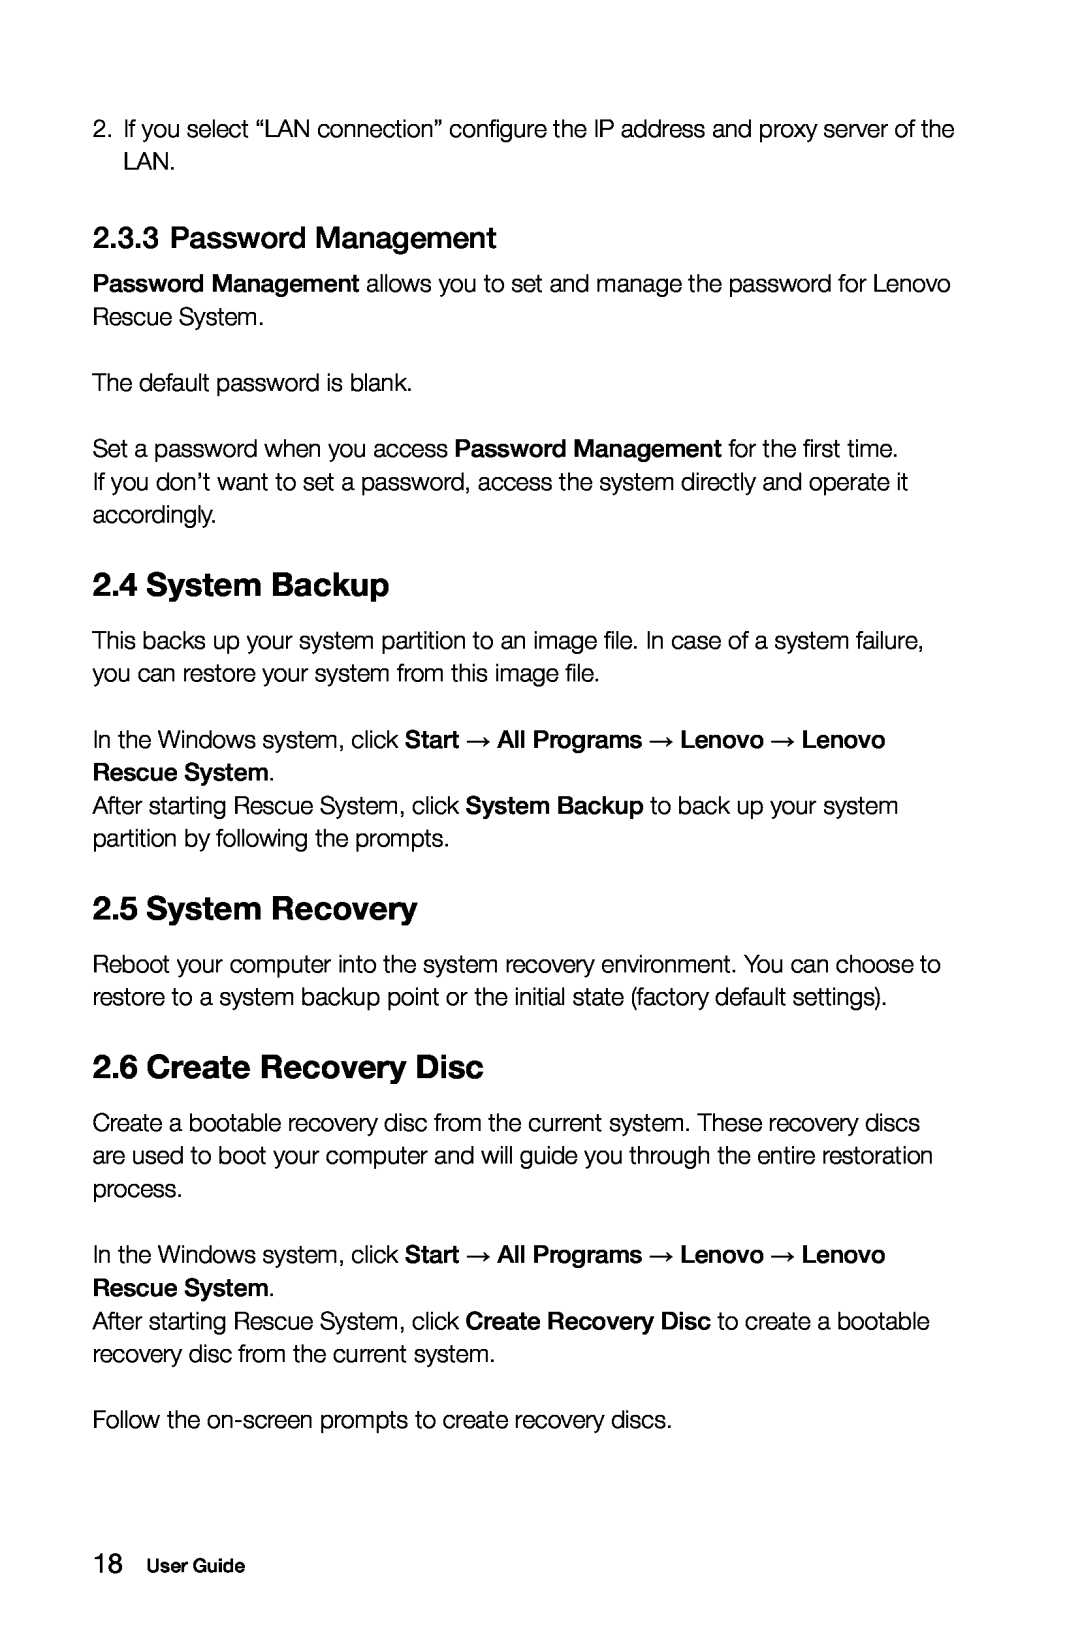 Lenovo 10080/3099, 10068/7752, 10059/7723 manual System Backup, System Recovery, Create Recovery Disc, Password Management 